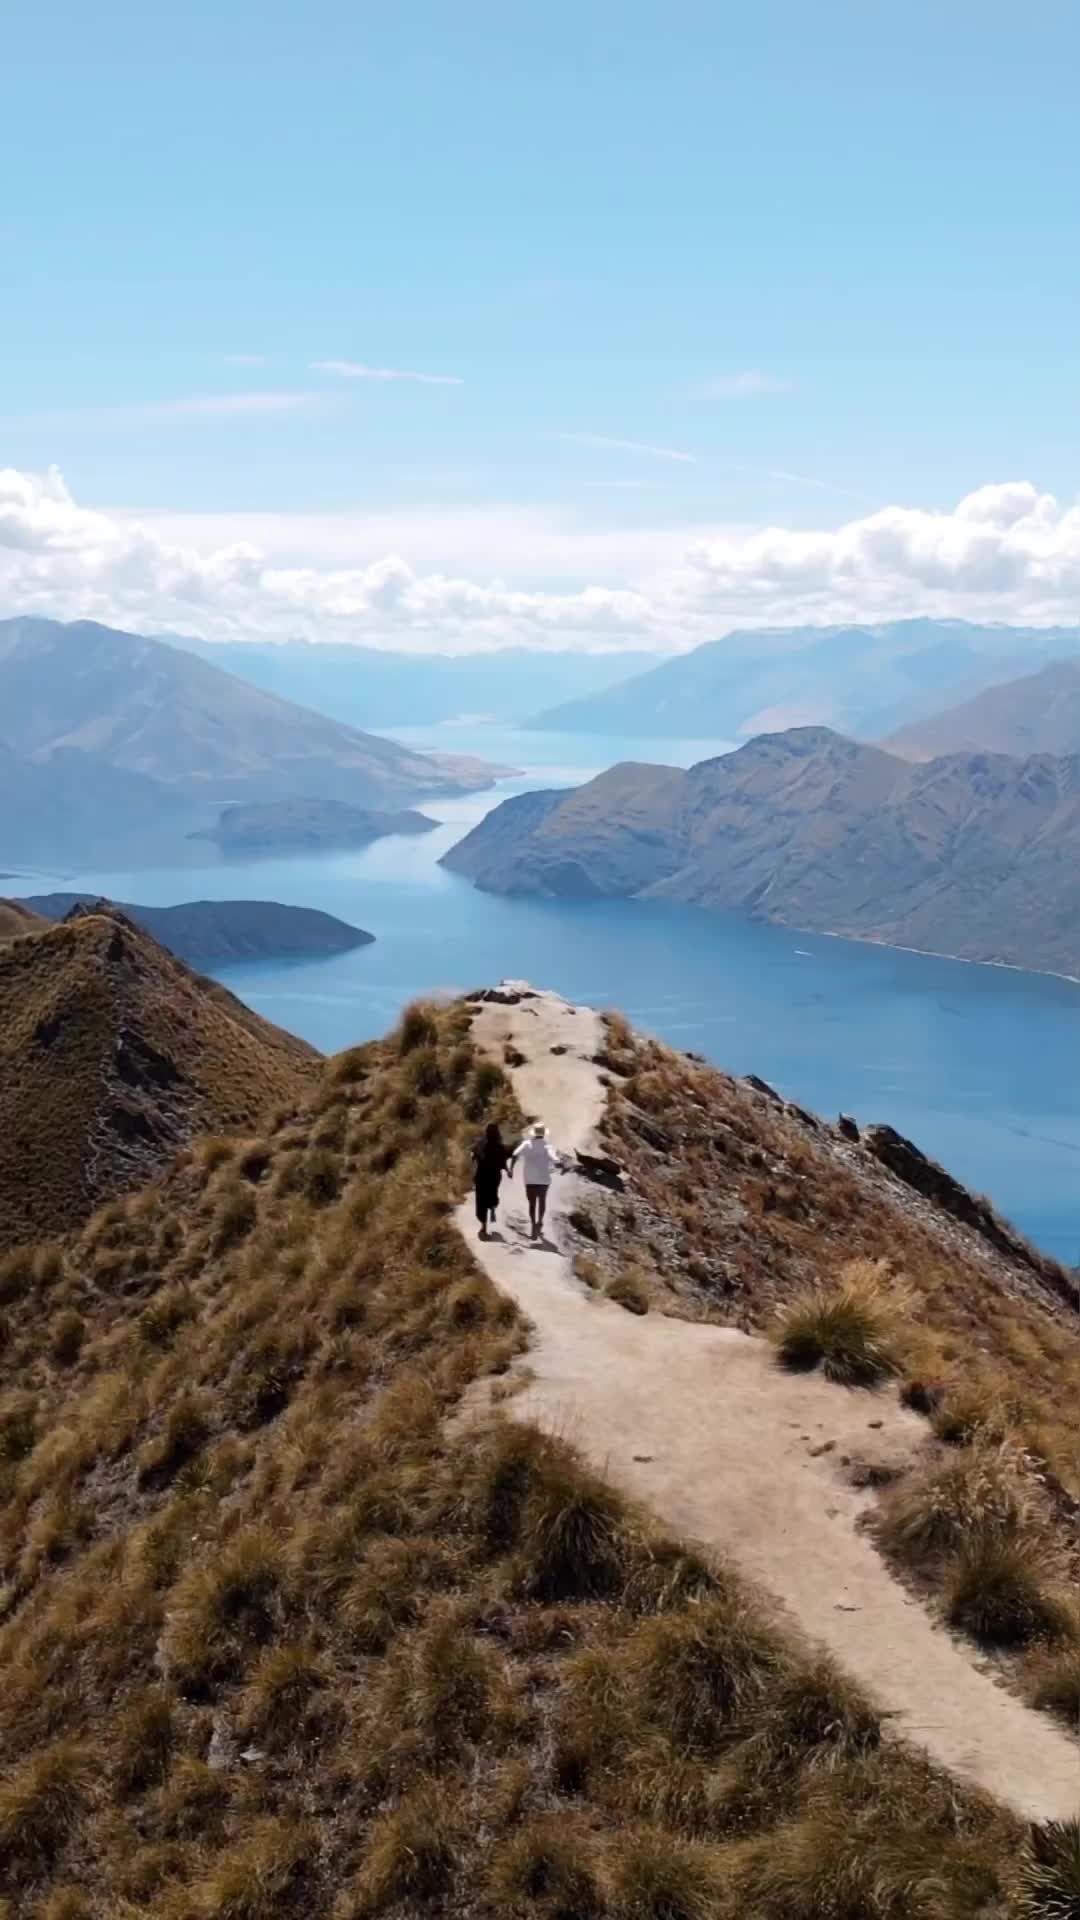 Reaching Roys Peak Summit After 3 Hours of Hiking